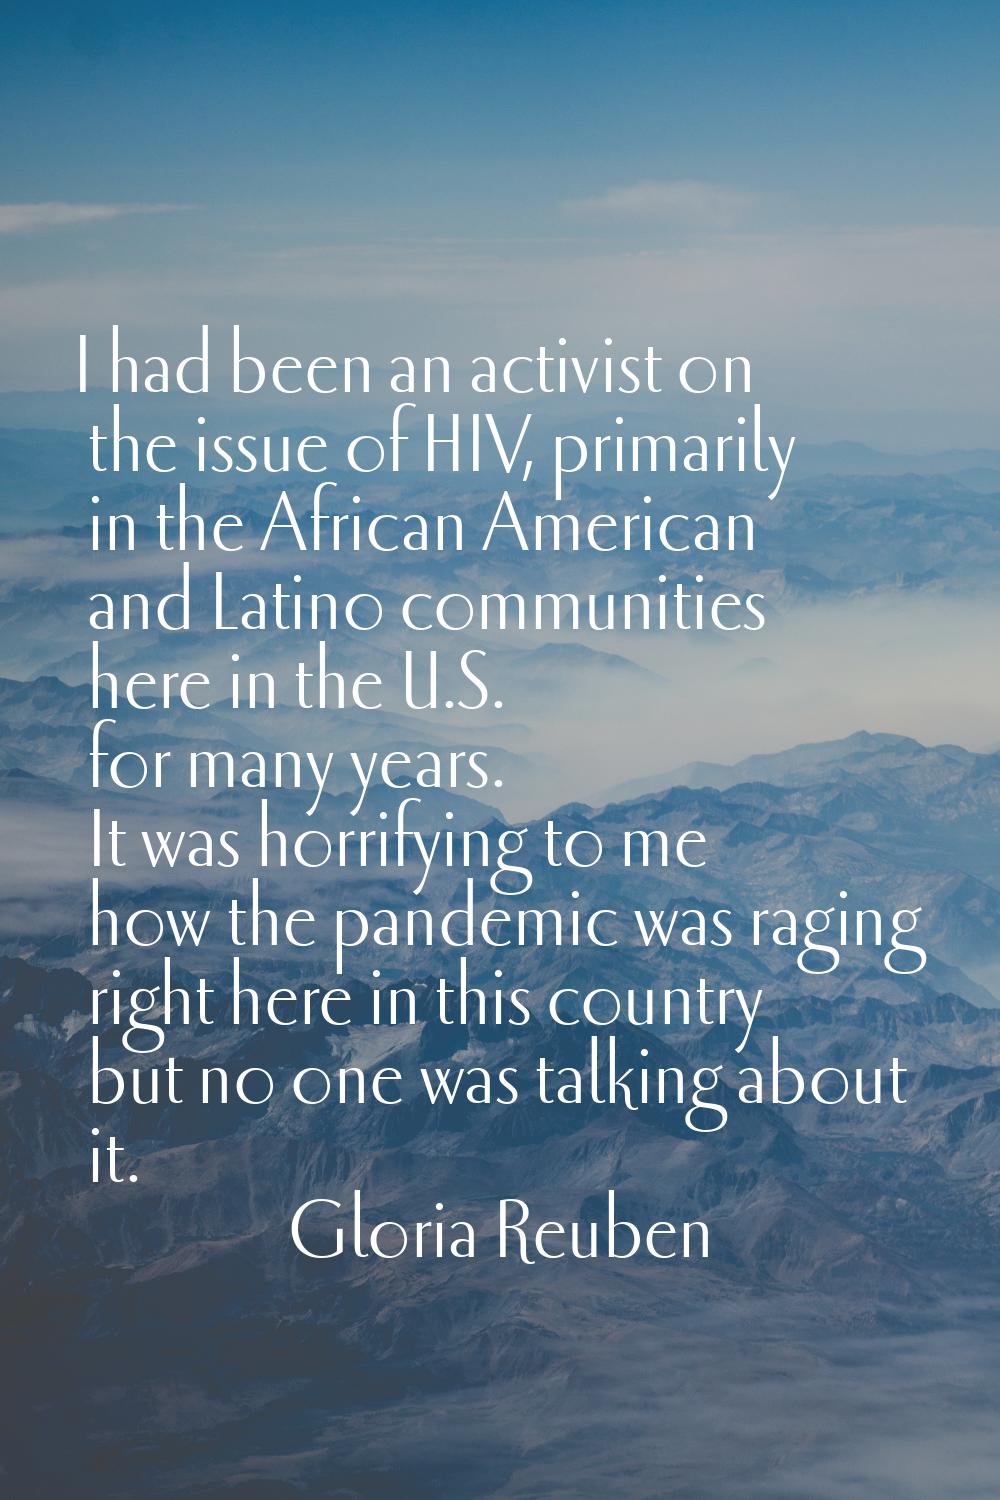 I had been an activist on the issue of HIV, primarily in the African American and Latino communitie